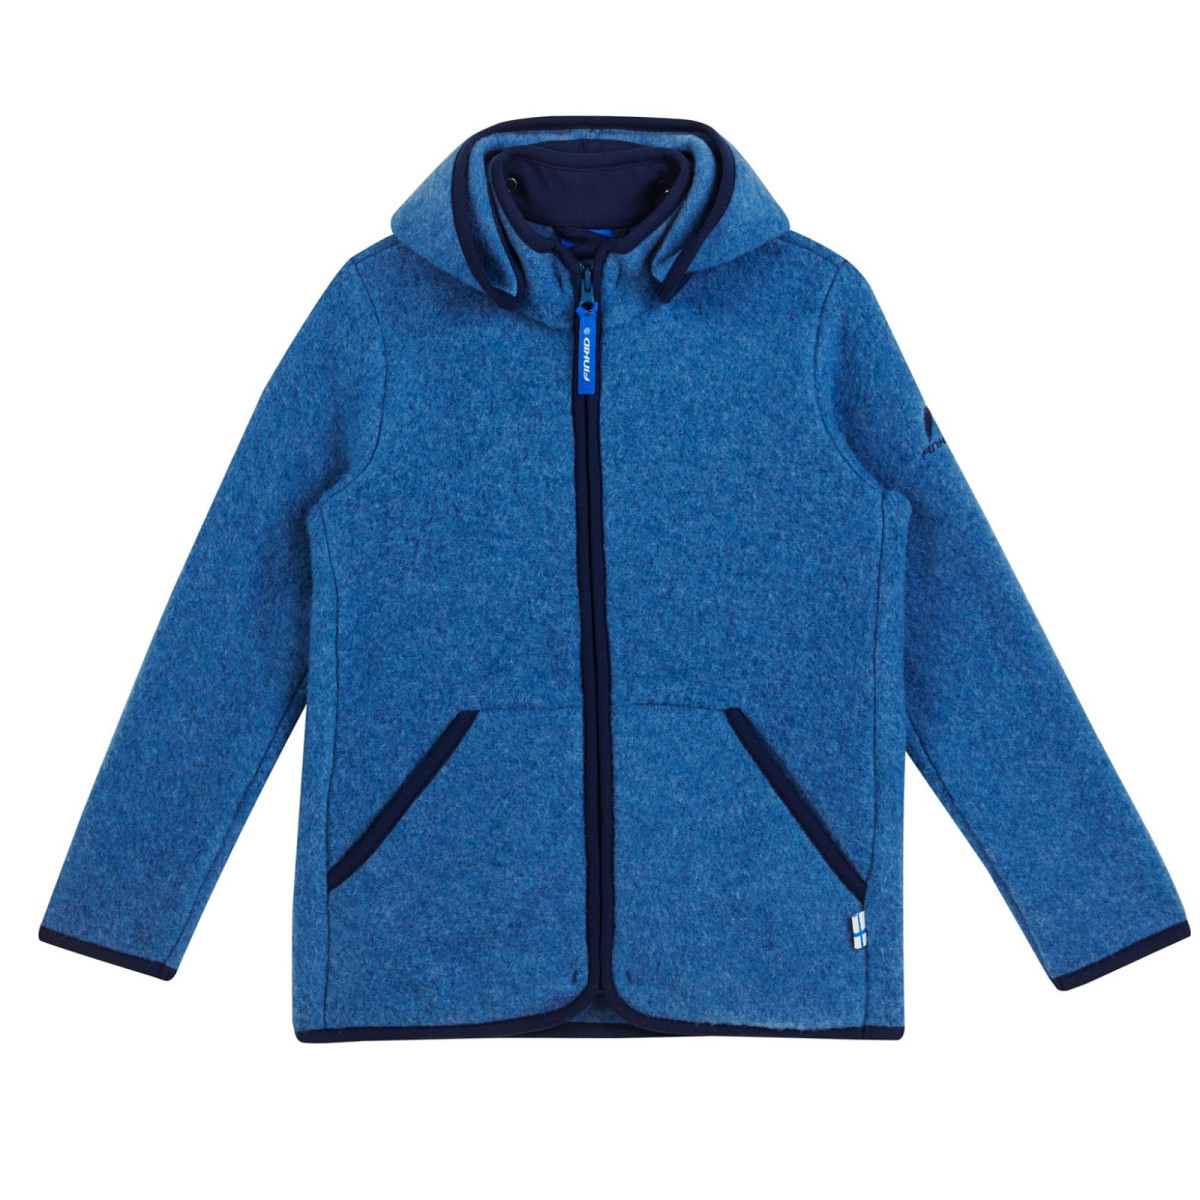 Finkid Luonto Wool Real Teal/Navy, 119,95 €